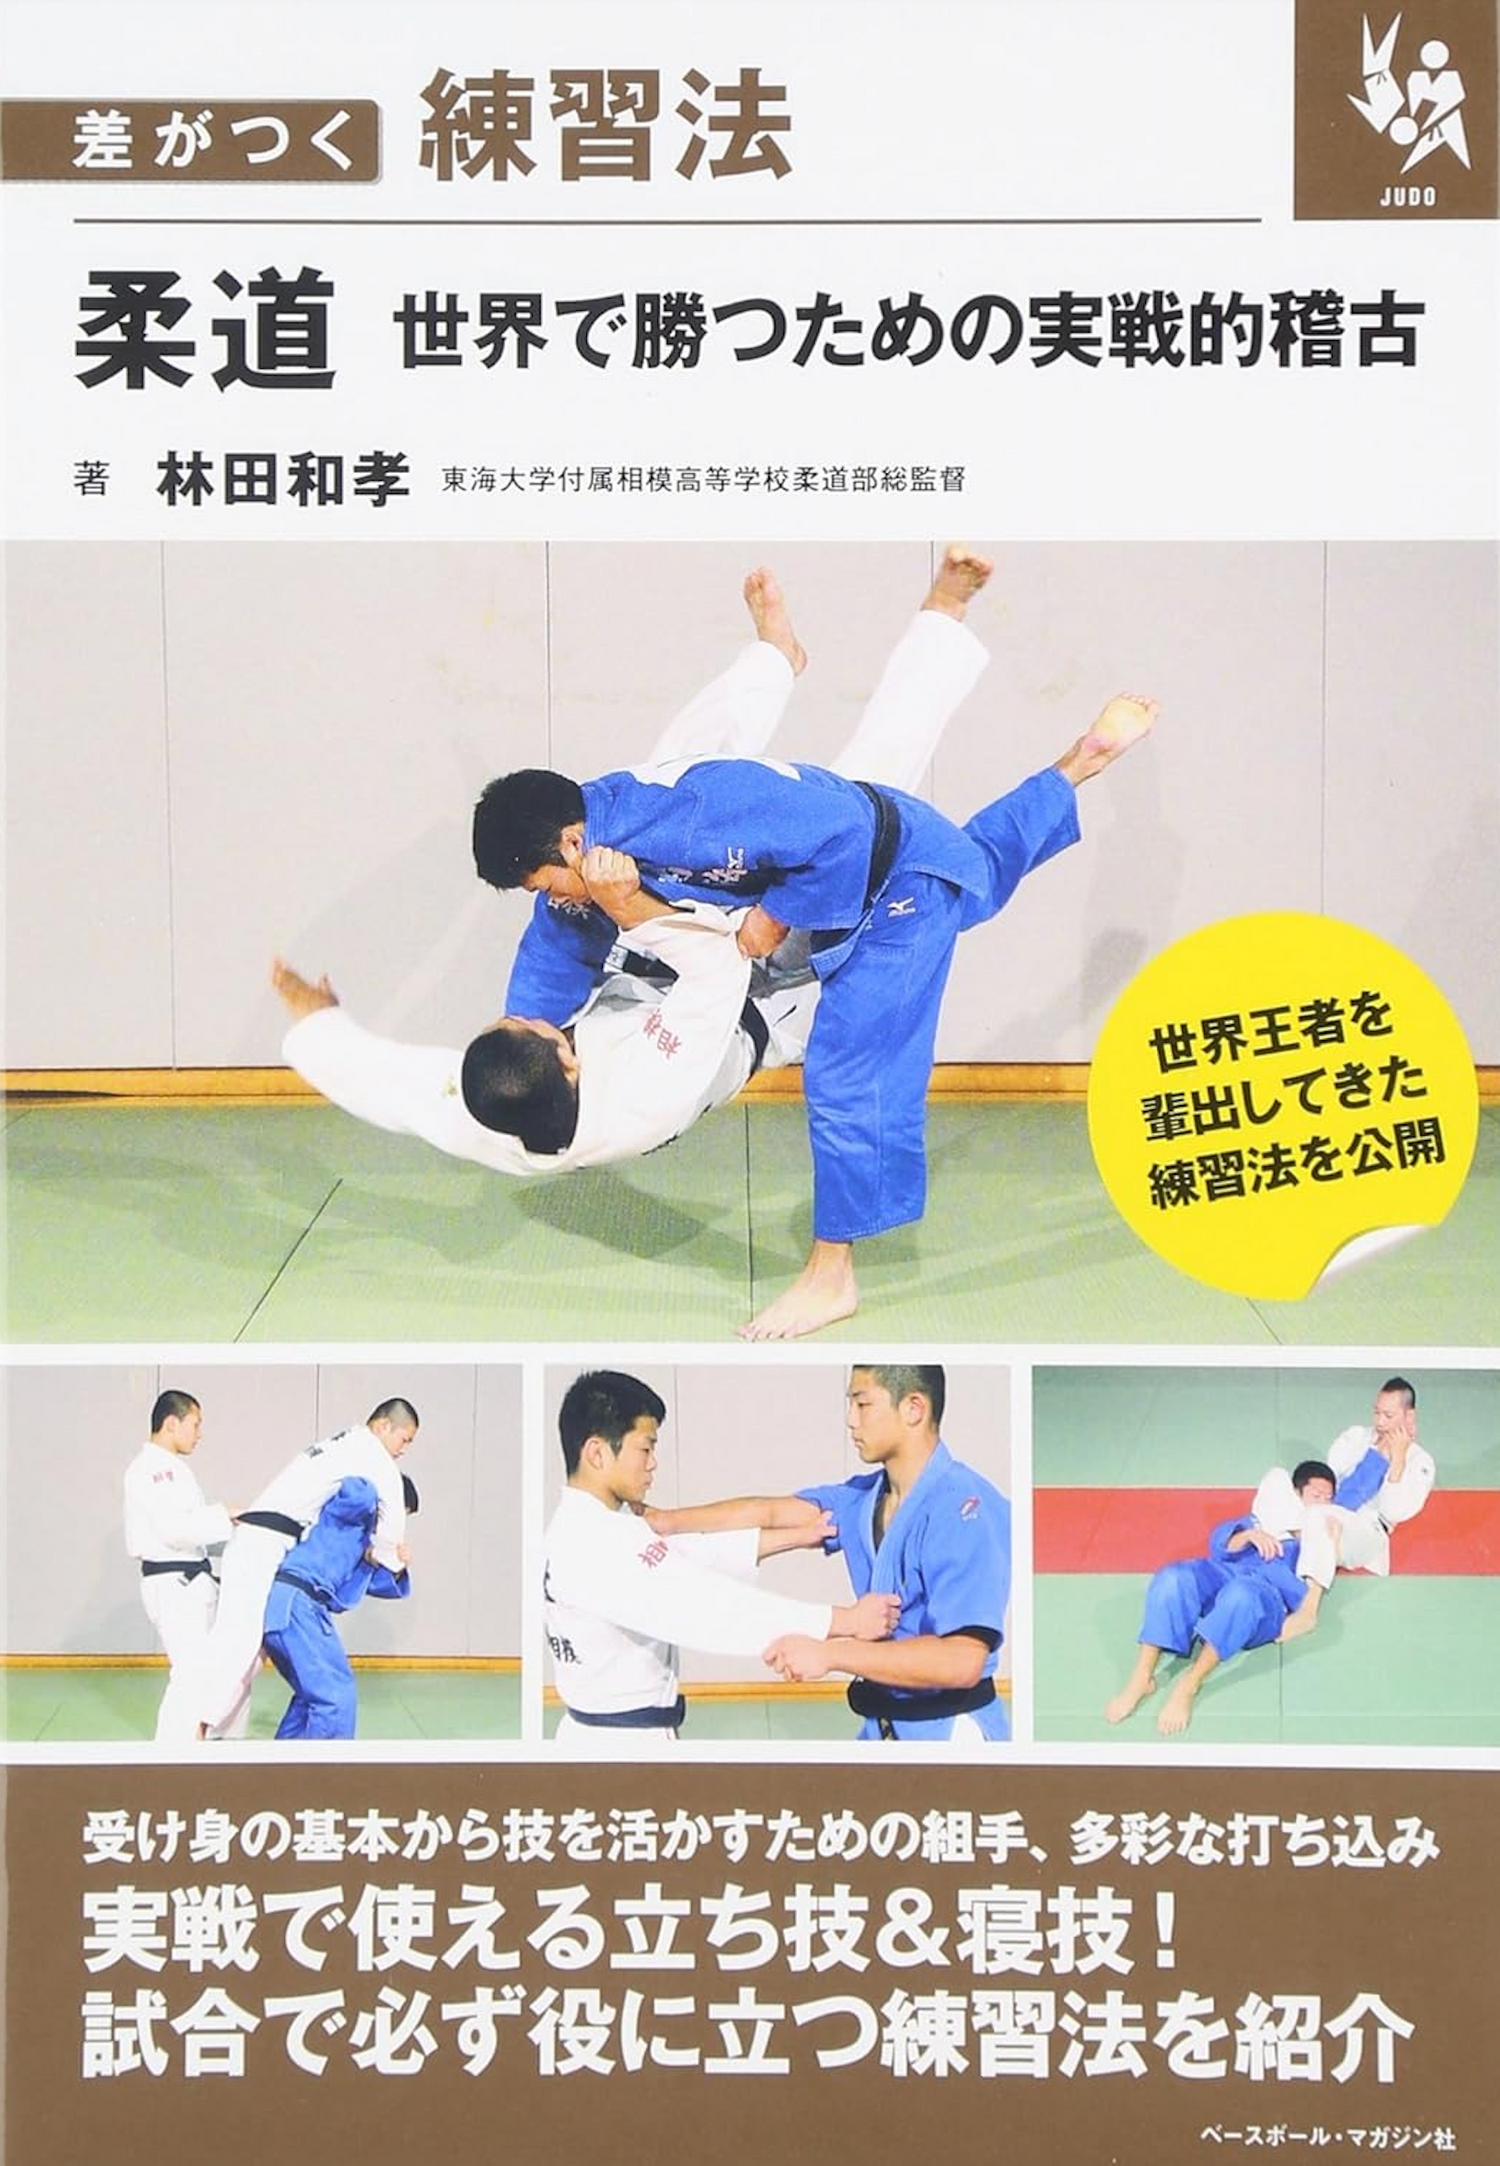 Practical Training to Win in the Judo World: Training Methods That Make a Difference Book by Kazutaka Hayashida